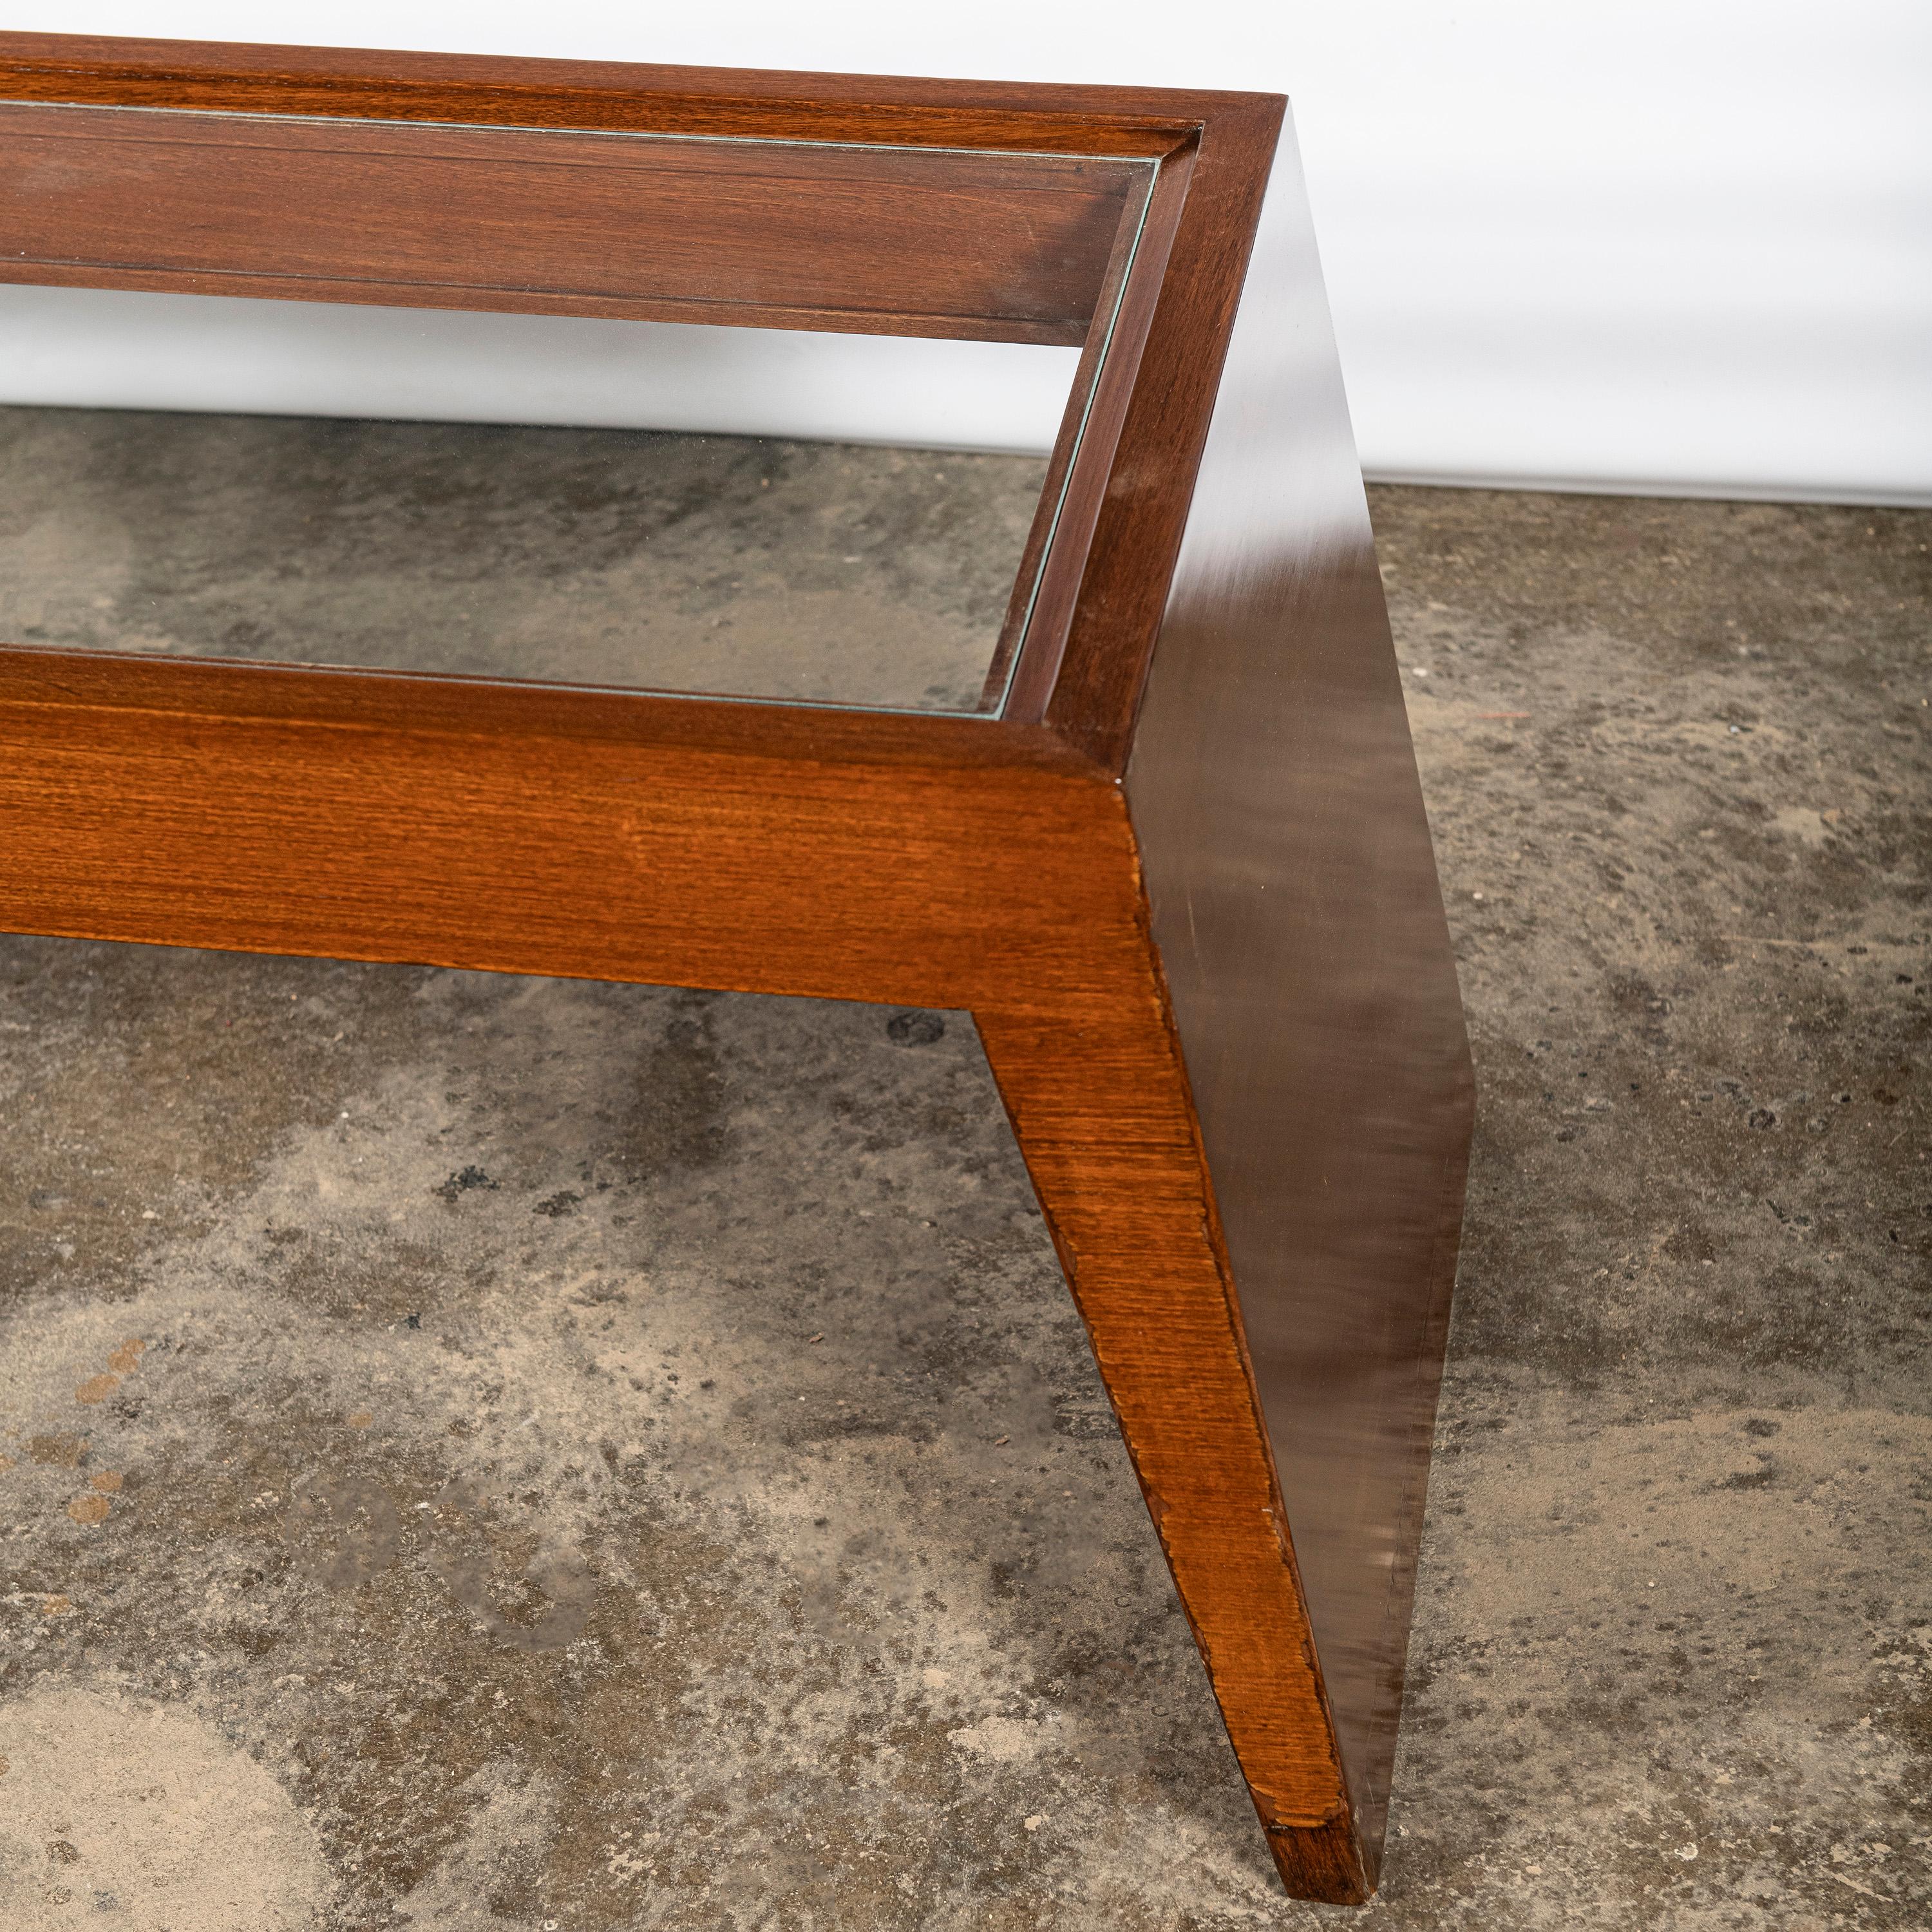 Argentine Pair of Wood and Glass Low Tables by Nordiska, Argentina, Buenos Aires, c. 1950 For Sale